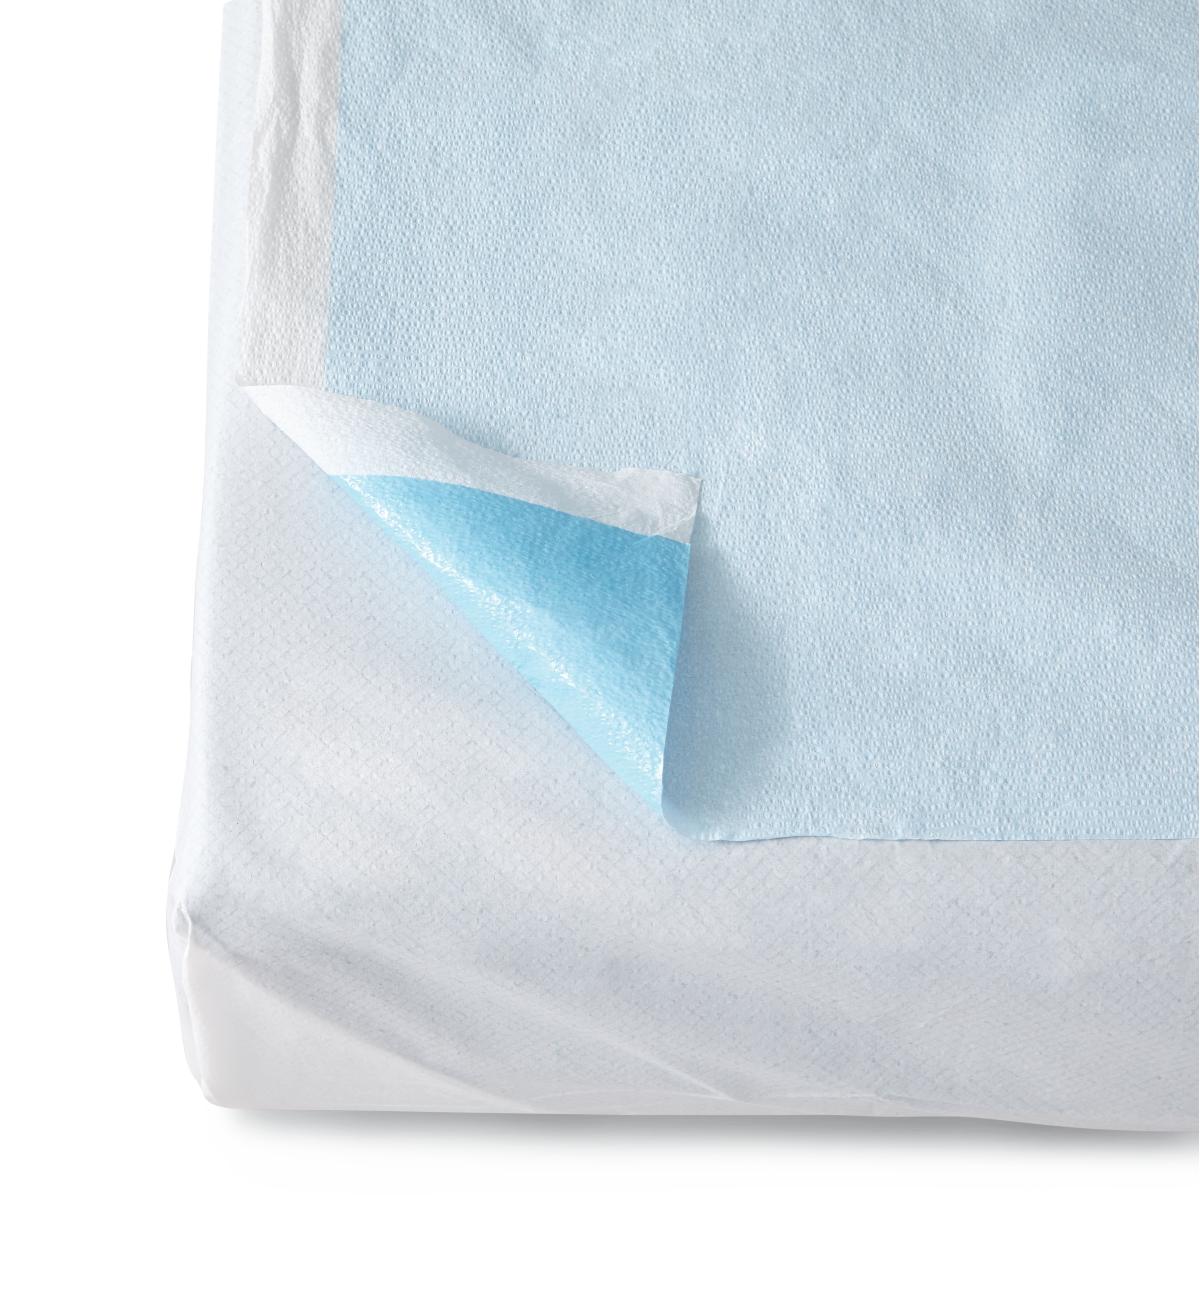 Disposable Tissue/Poly Flat Stretcher Sheets,Blue Case of 50